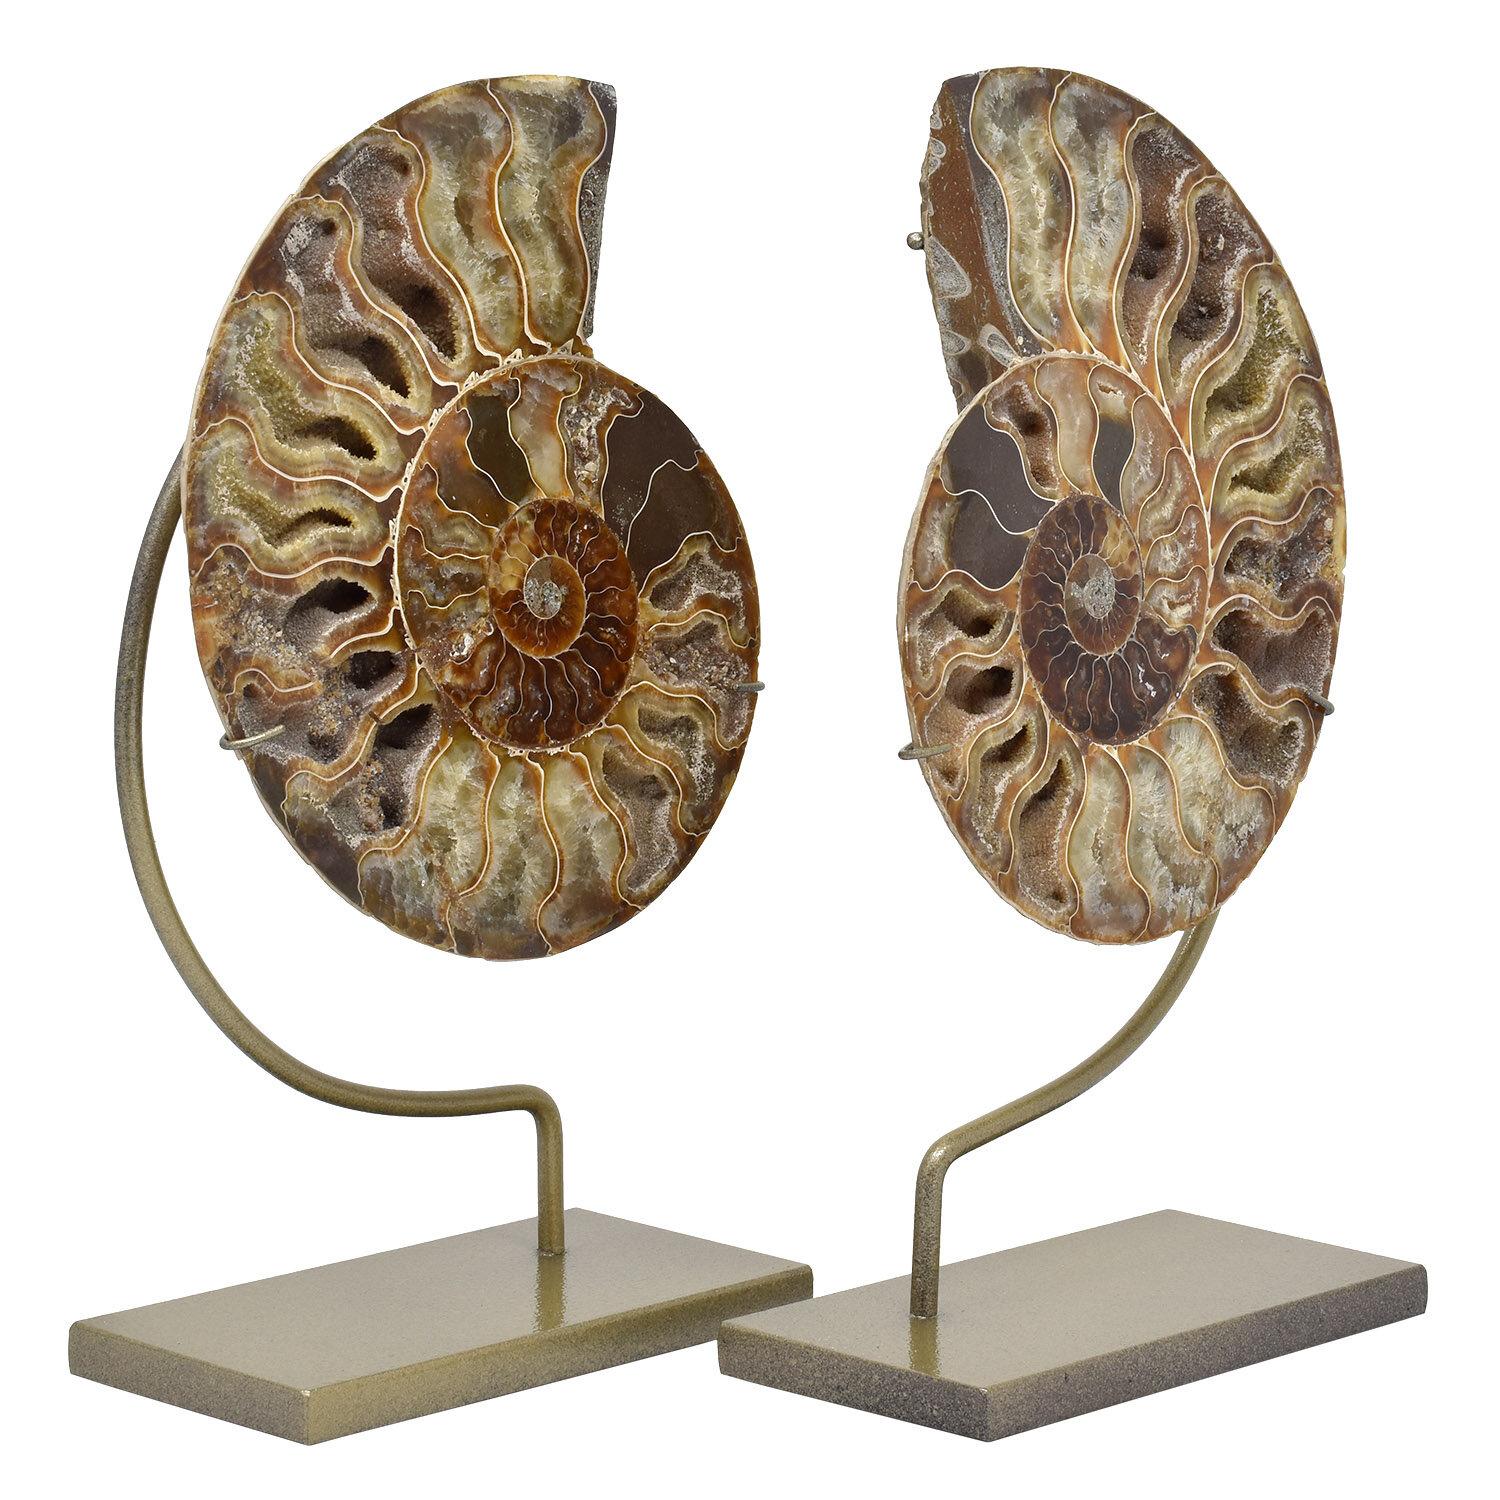 ammonite fossil with tentacles